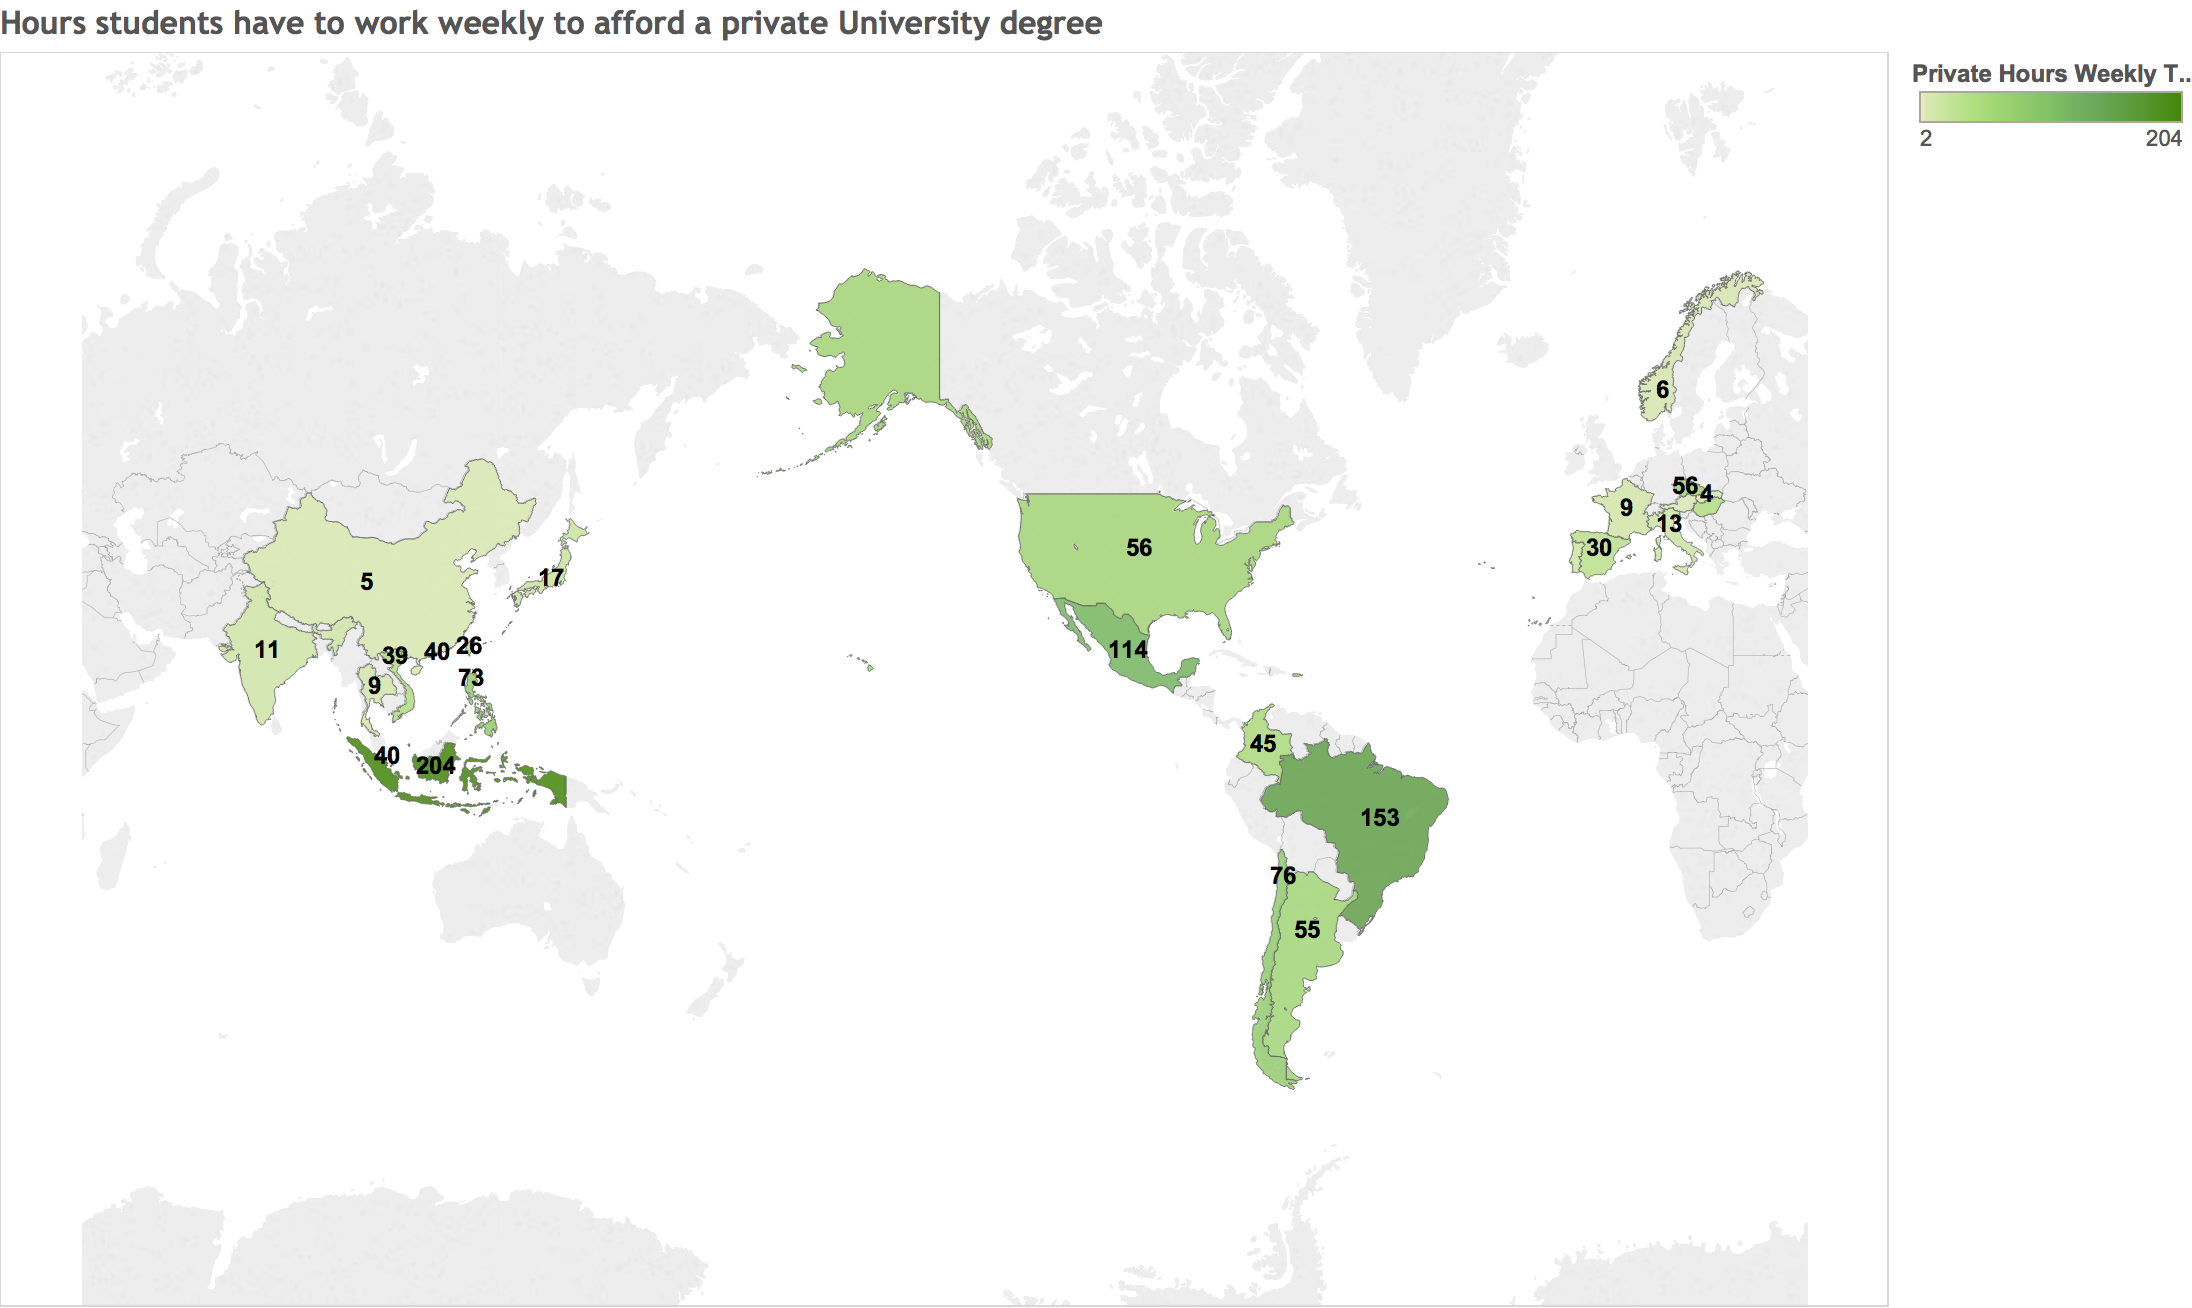 Weekly hours required to afford a public University degree